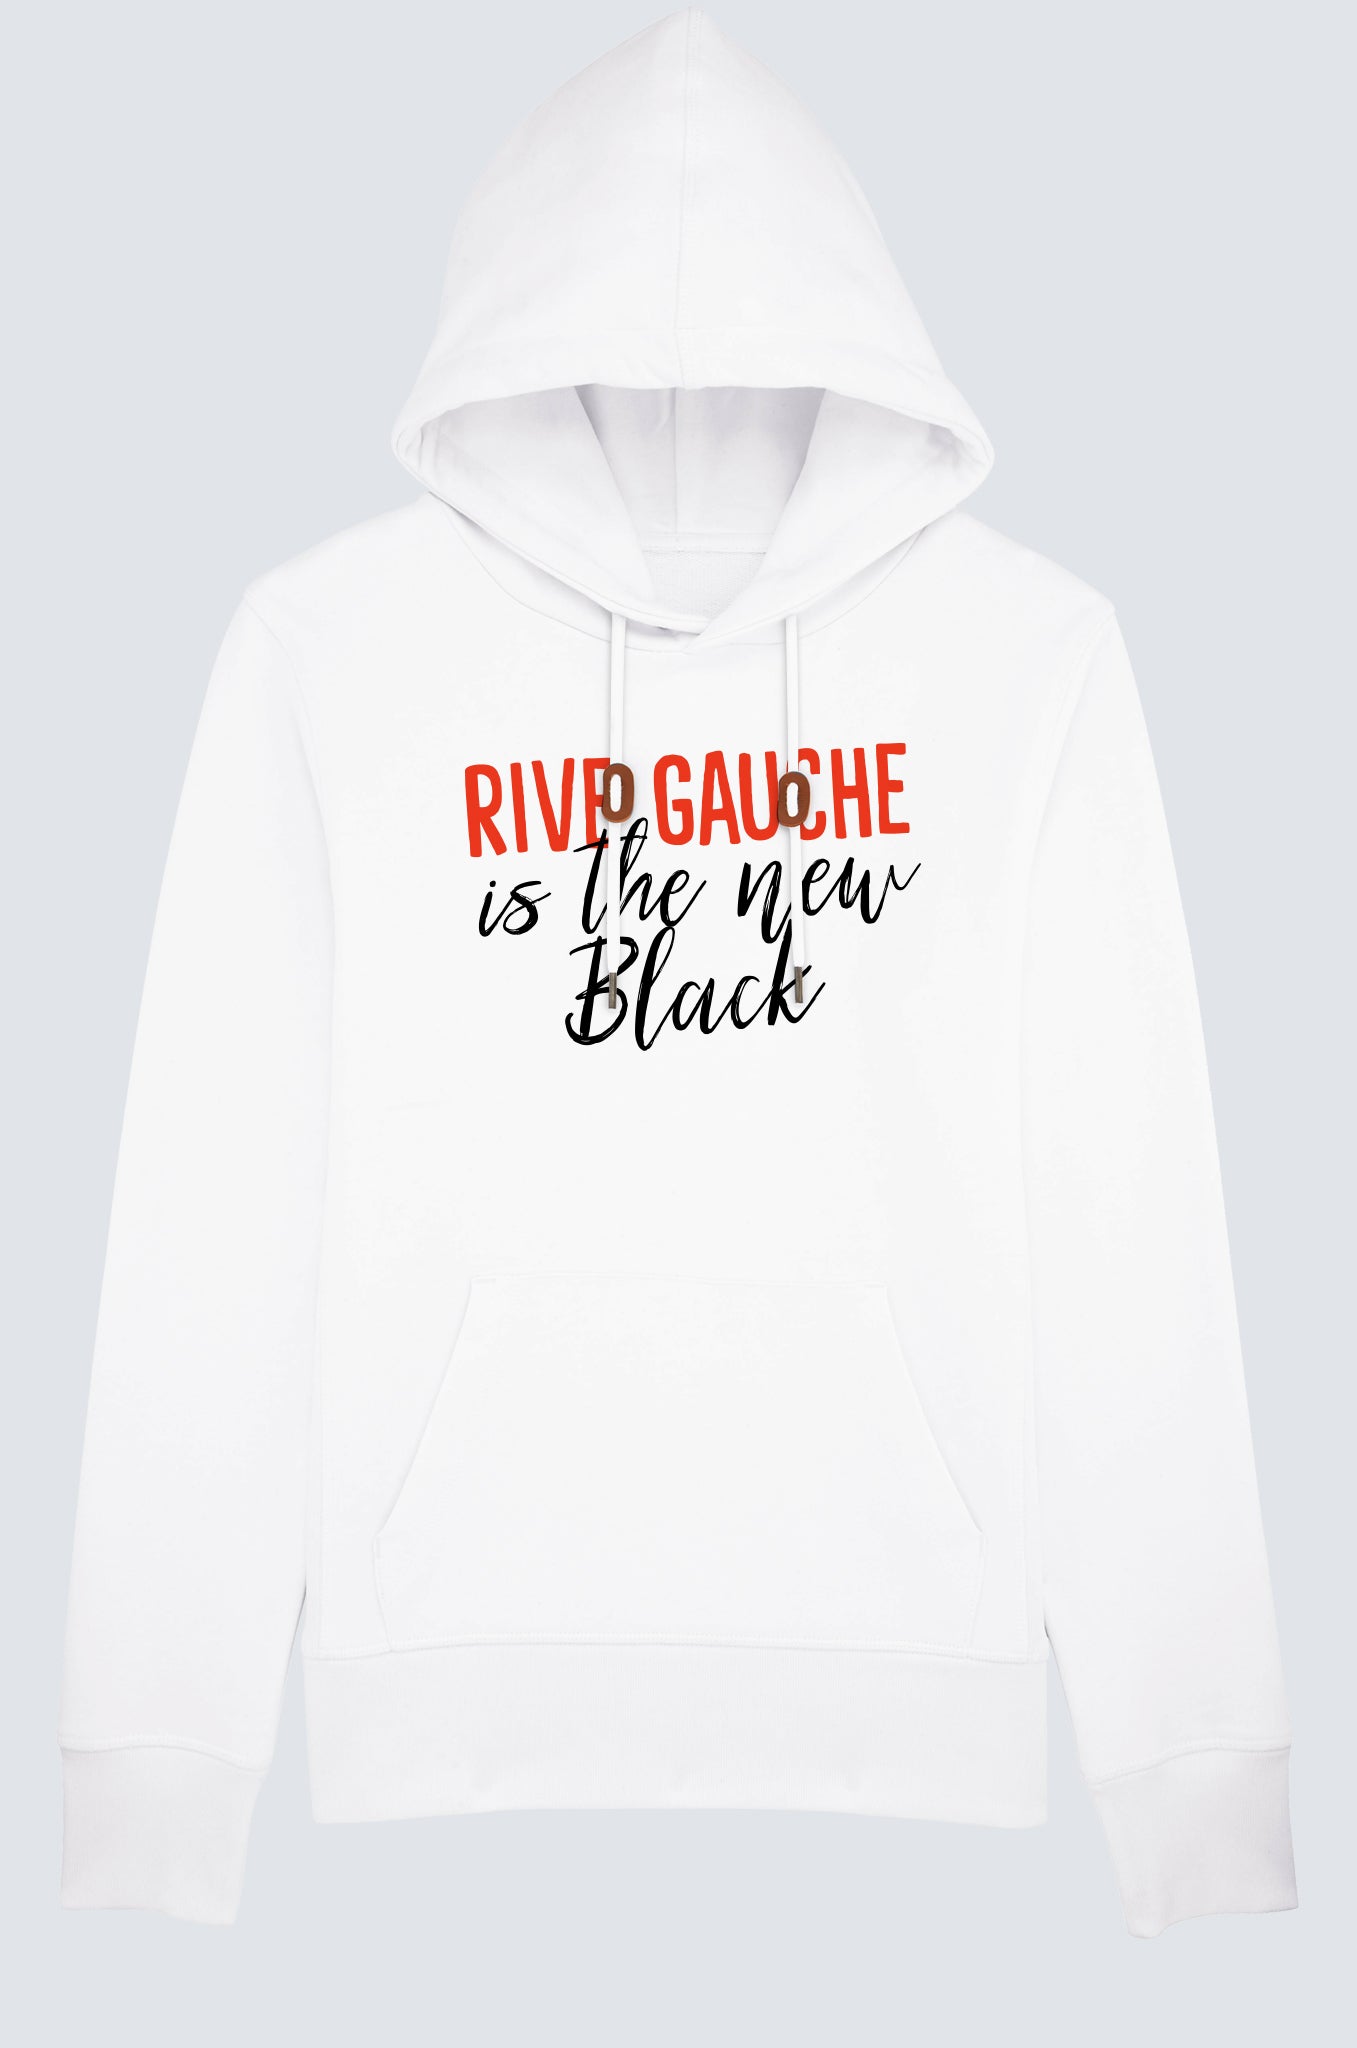 Rive Gauche is the new black